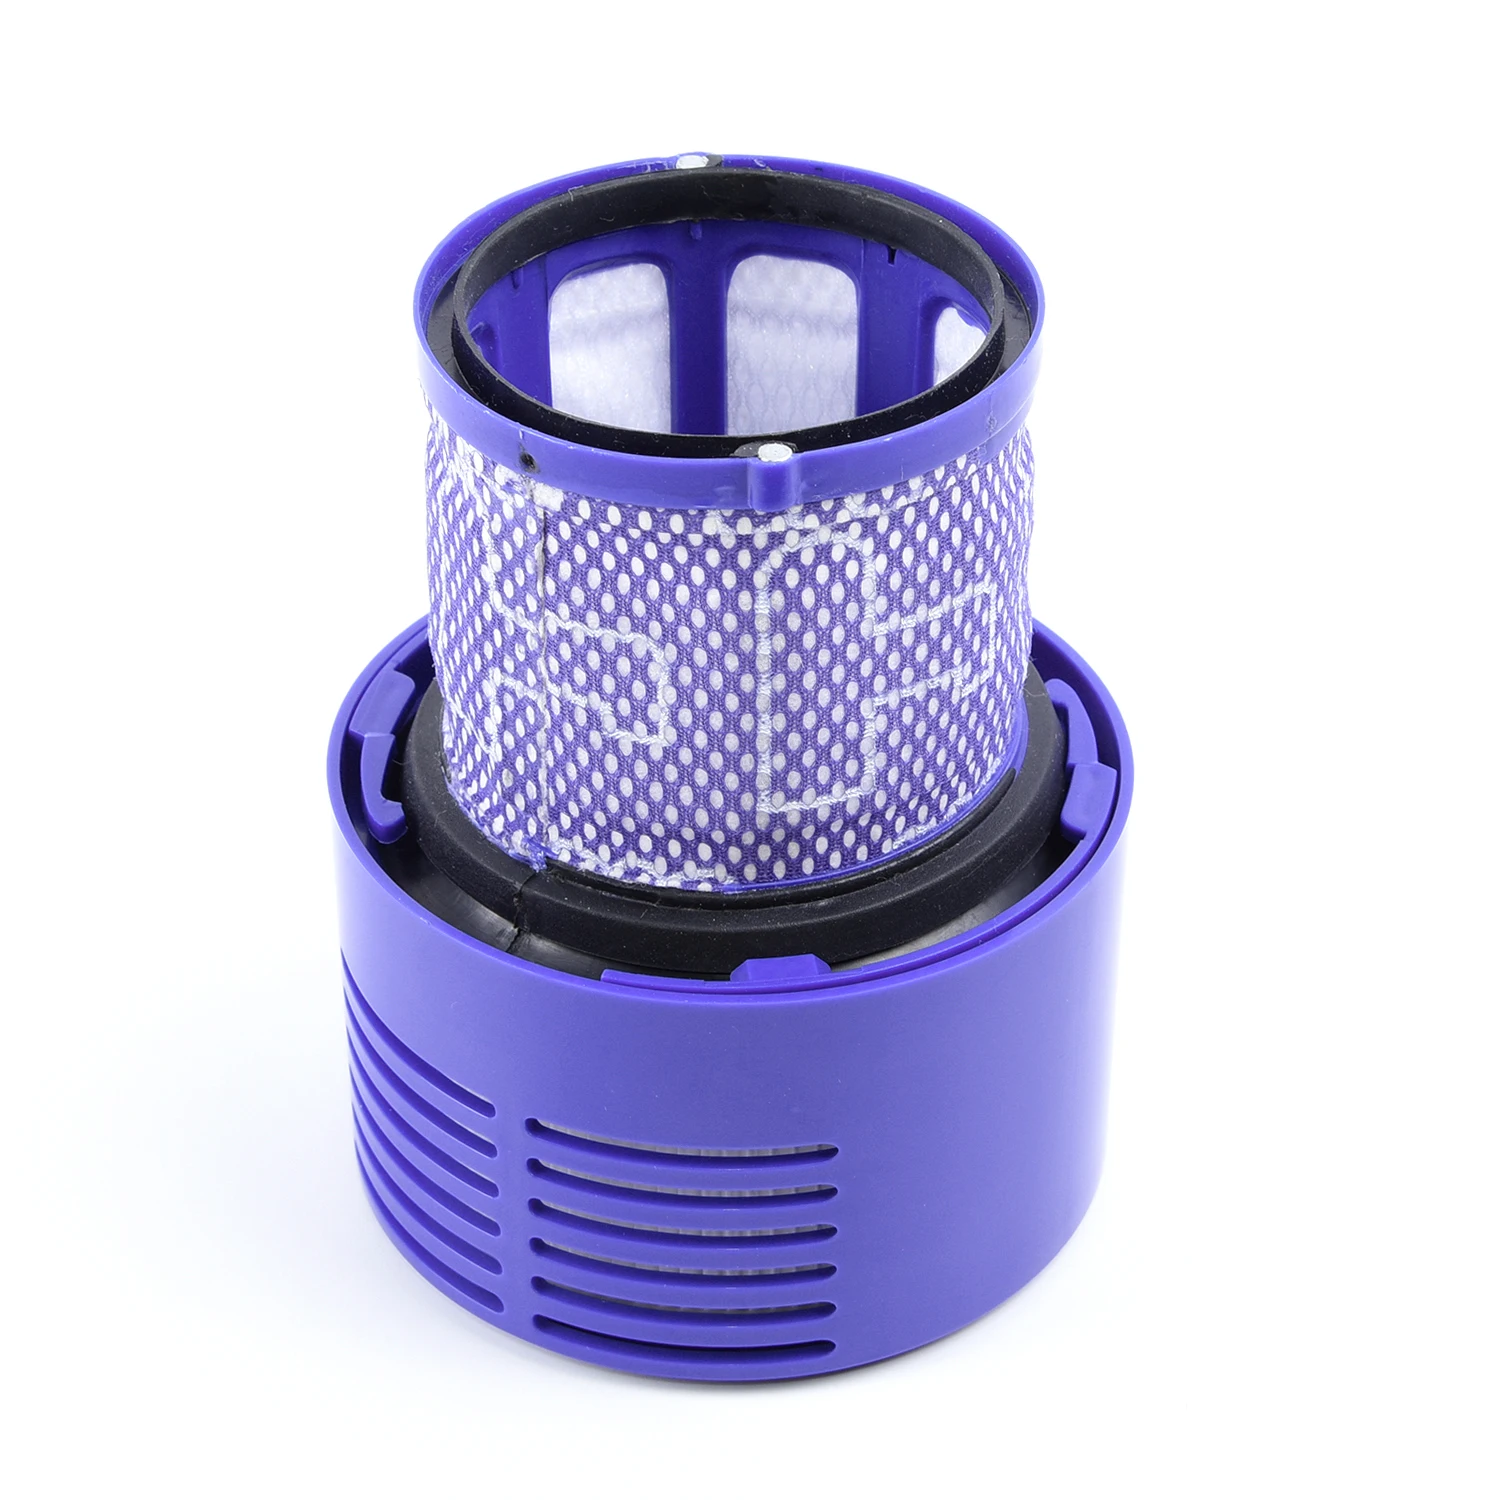 1*Filter For DYSON Cyclone V10 Animal/Absolute+/Total Clean Vacuum Washable Filter 100% Brand New And High Quality